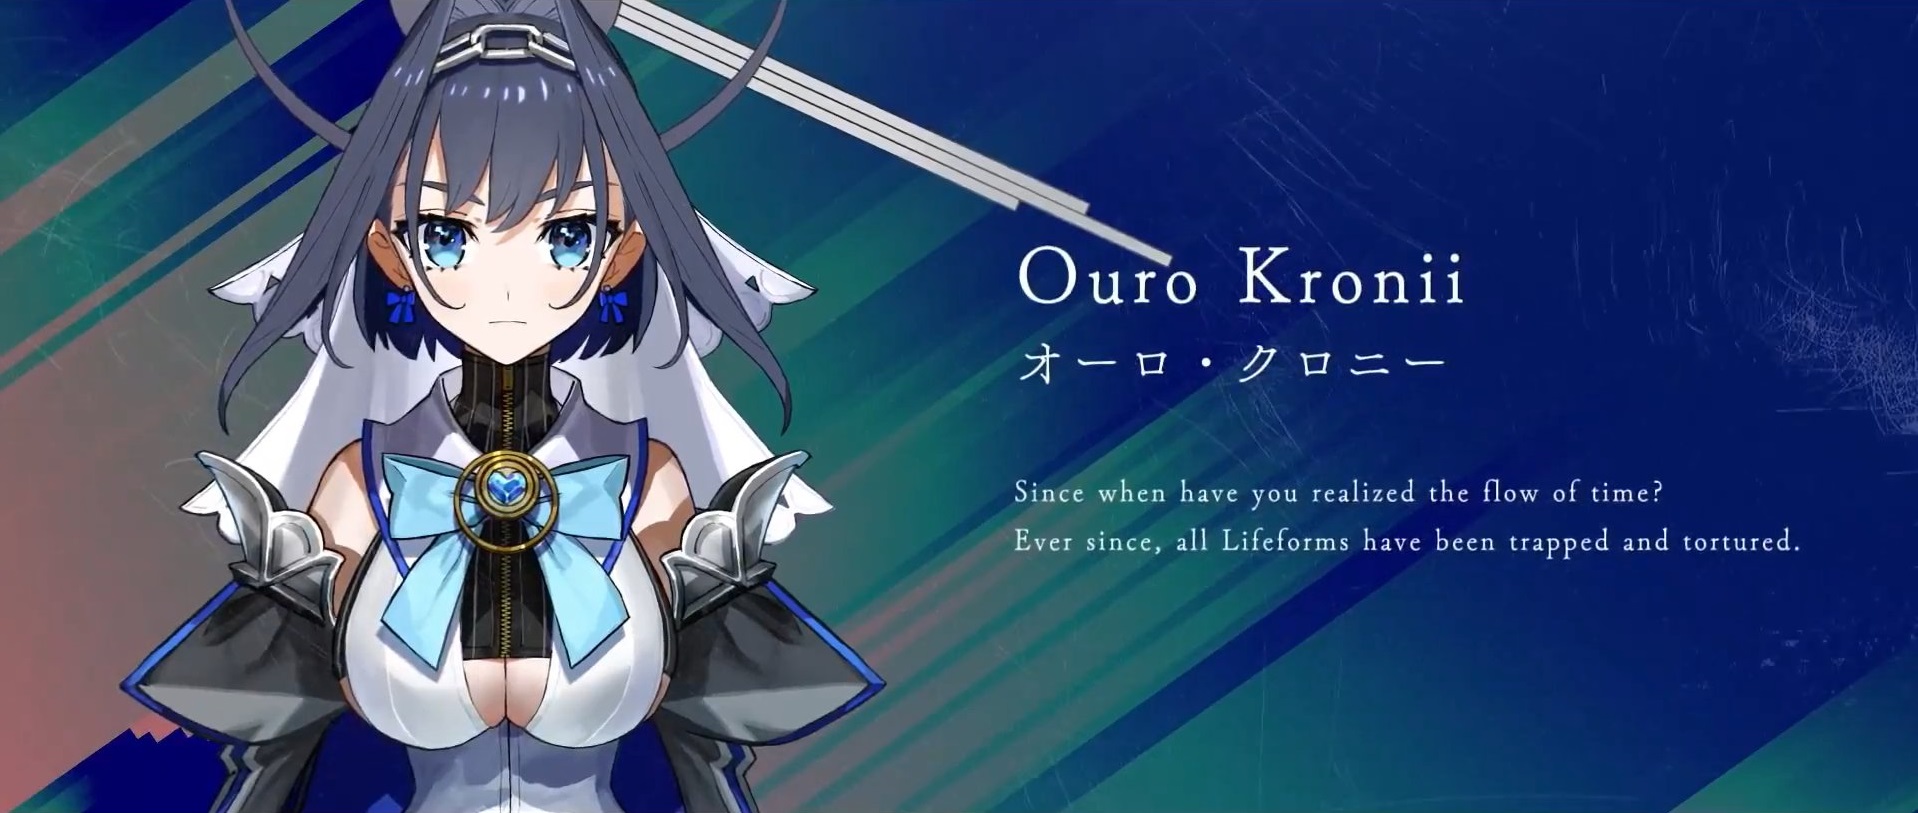 Kars English debuts new vtuber Ouro Kronii whose character designer is Wada Arco. Her first stream will be on August 22 5:00 AM JST